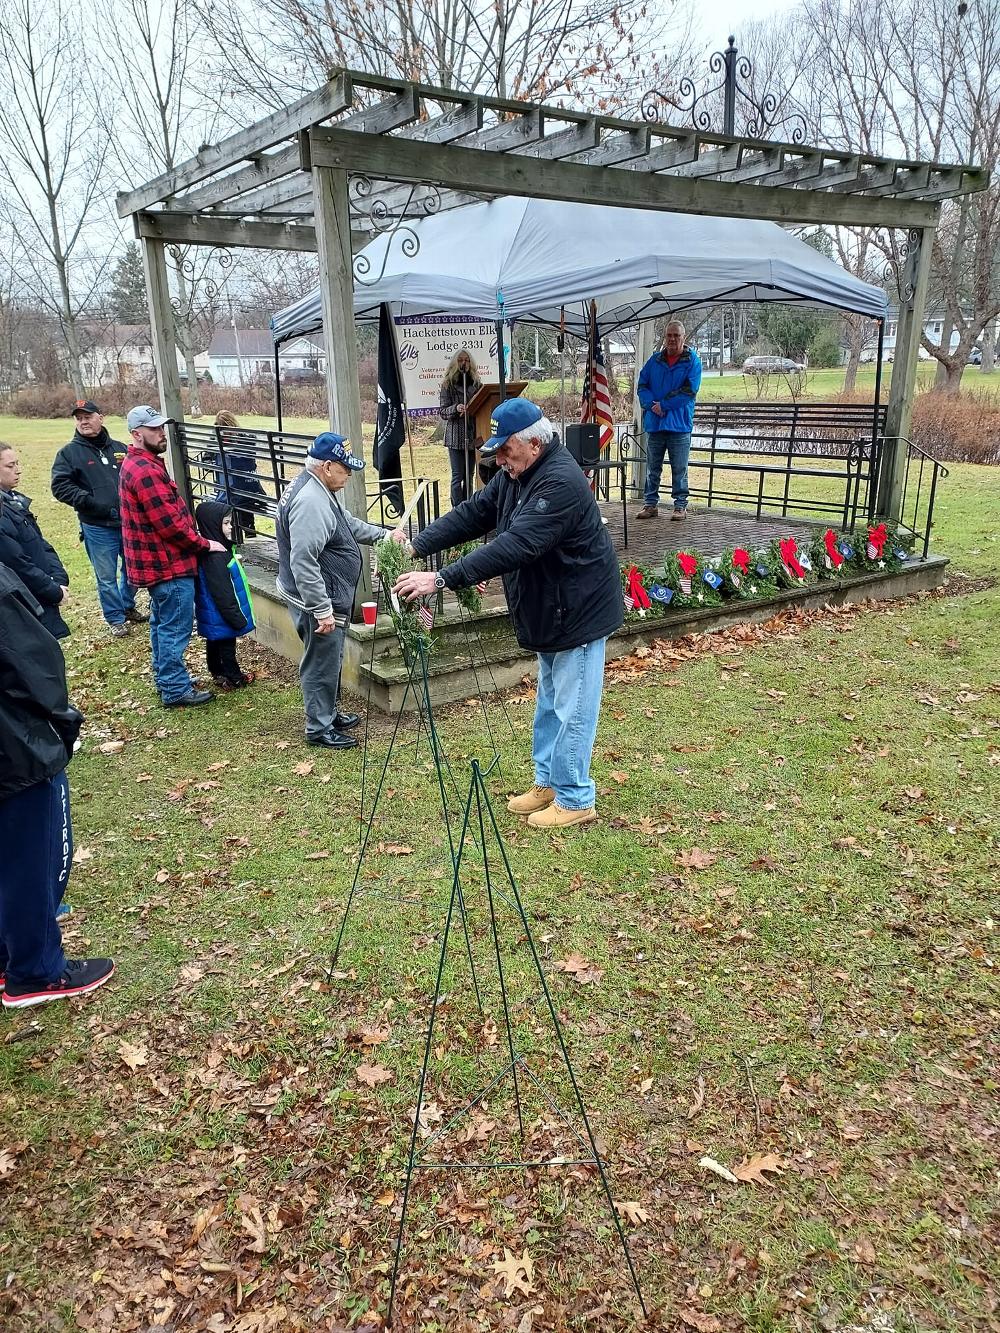 A veteran places a wreath to honor veterans at the Wreaths Across America ceremony held at the Union Cemetery.